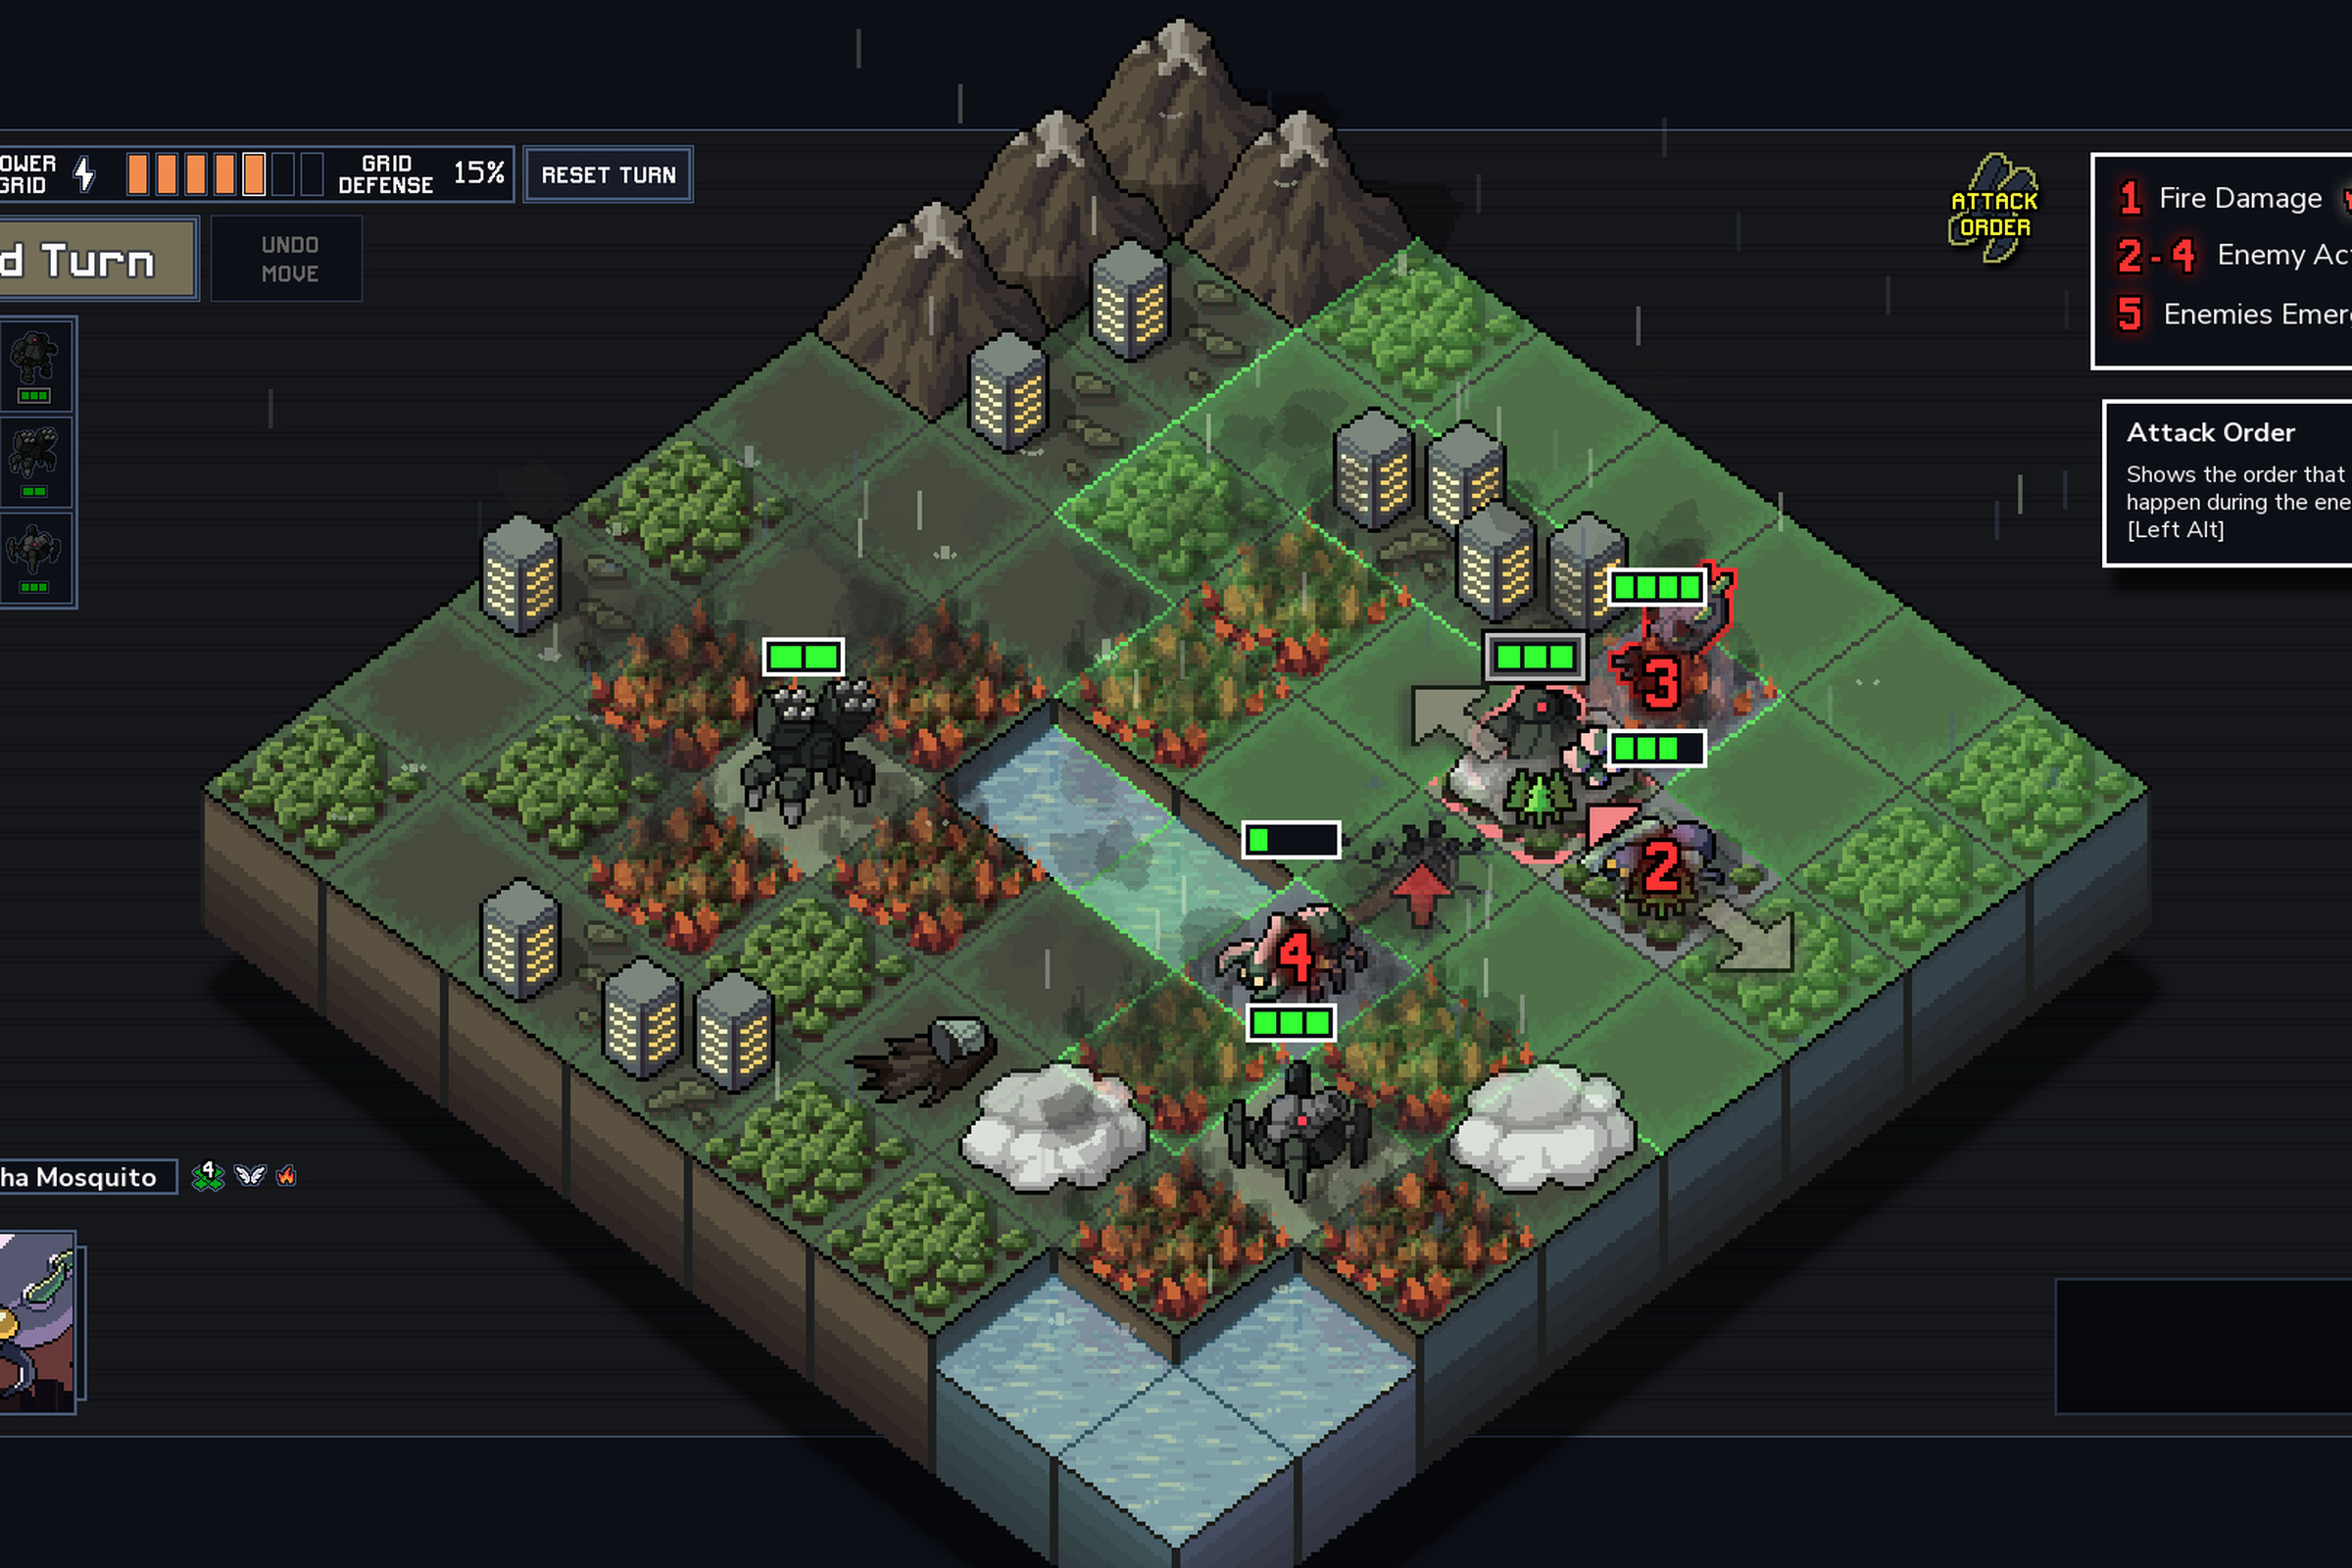 A screenshot from the game Into the Breach.